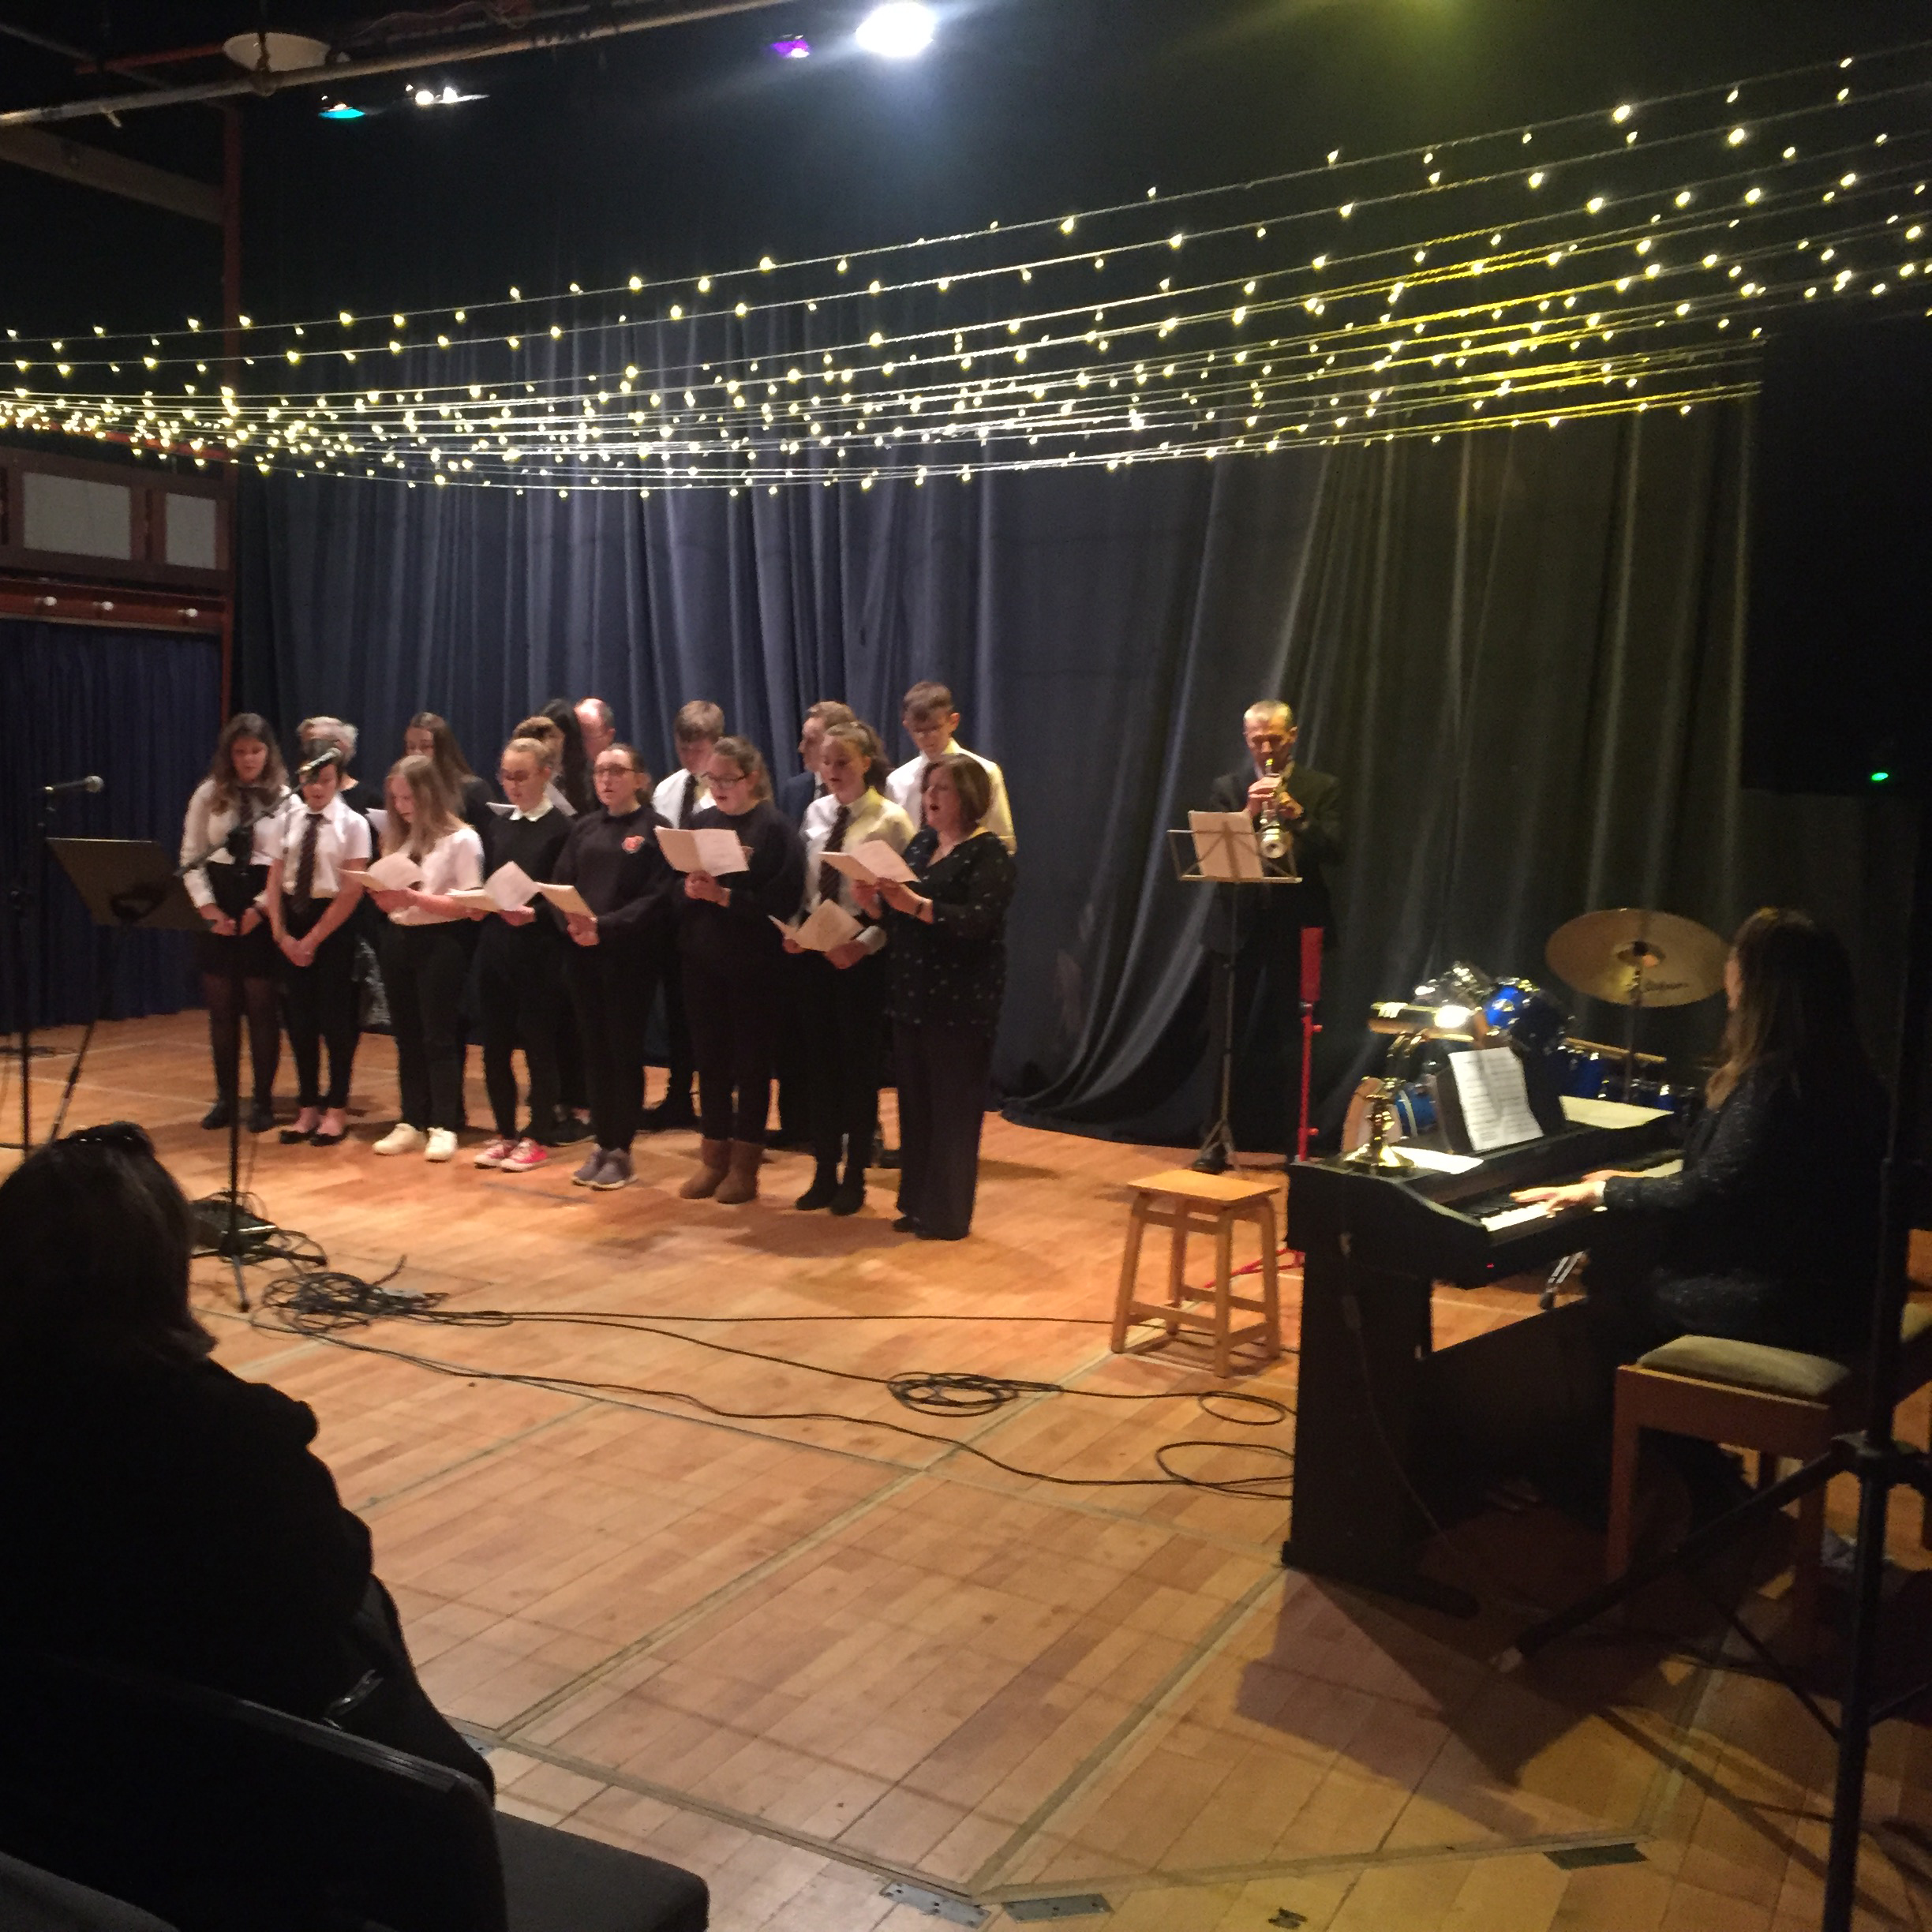 This image is of the school christmas concert held on Monday 16th December.